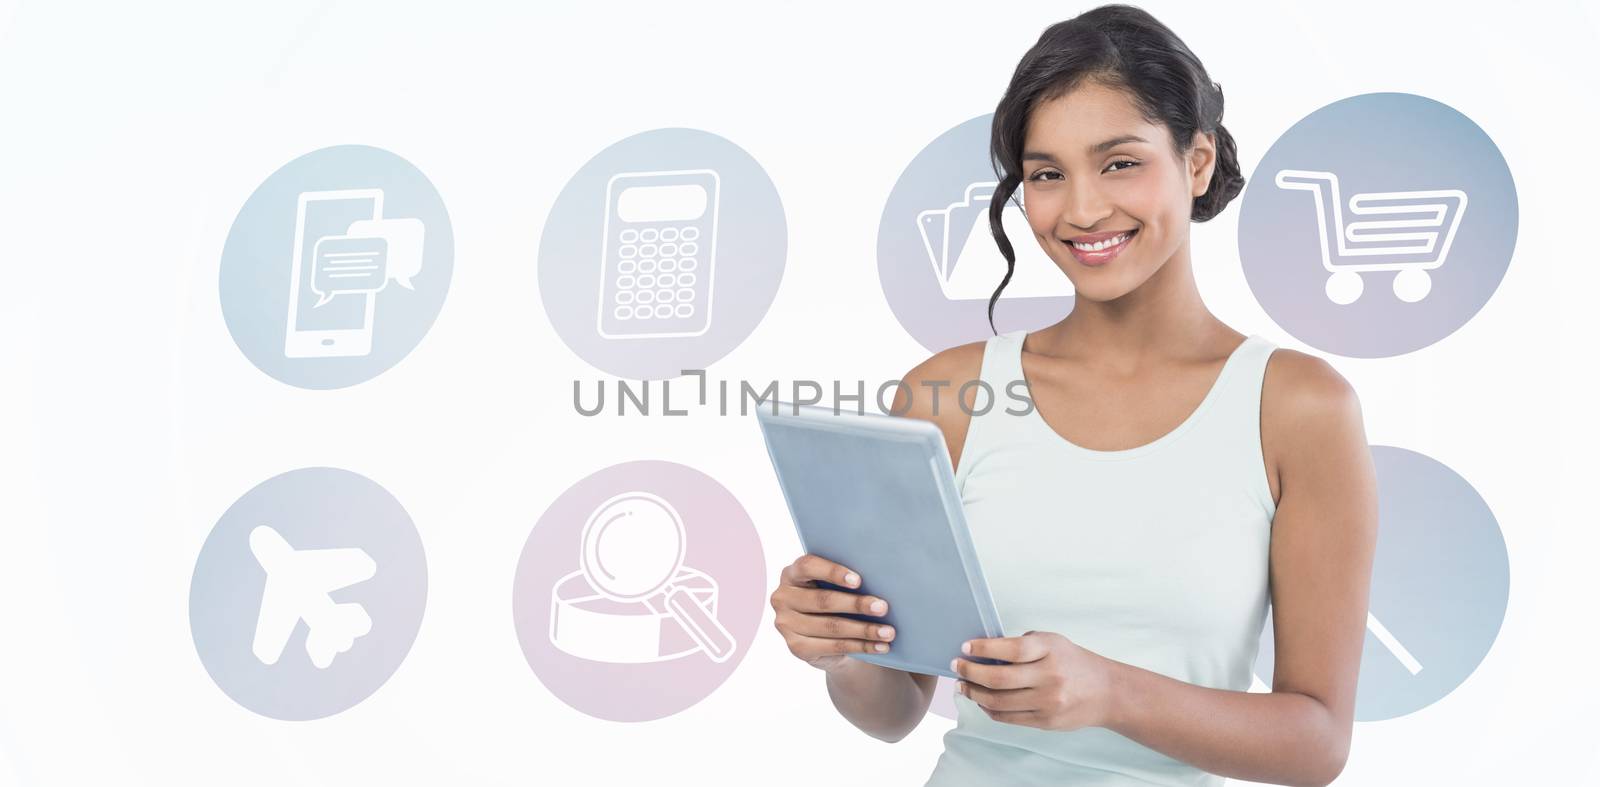 Portrait of smiling businesswoman using tablet computer against telephone apps icons 